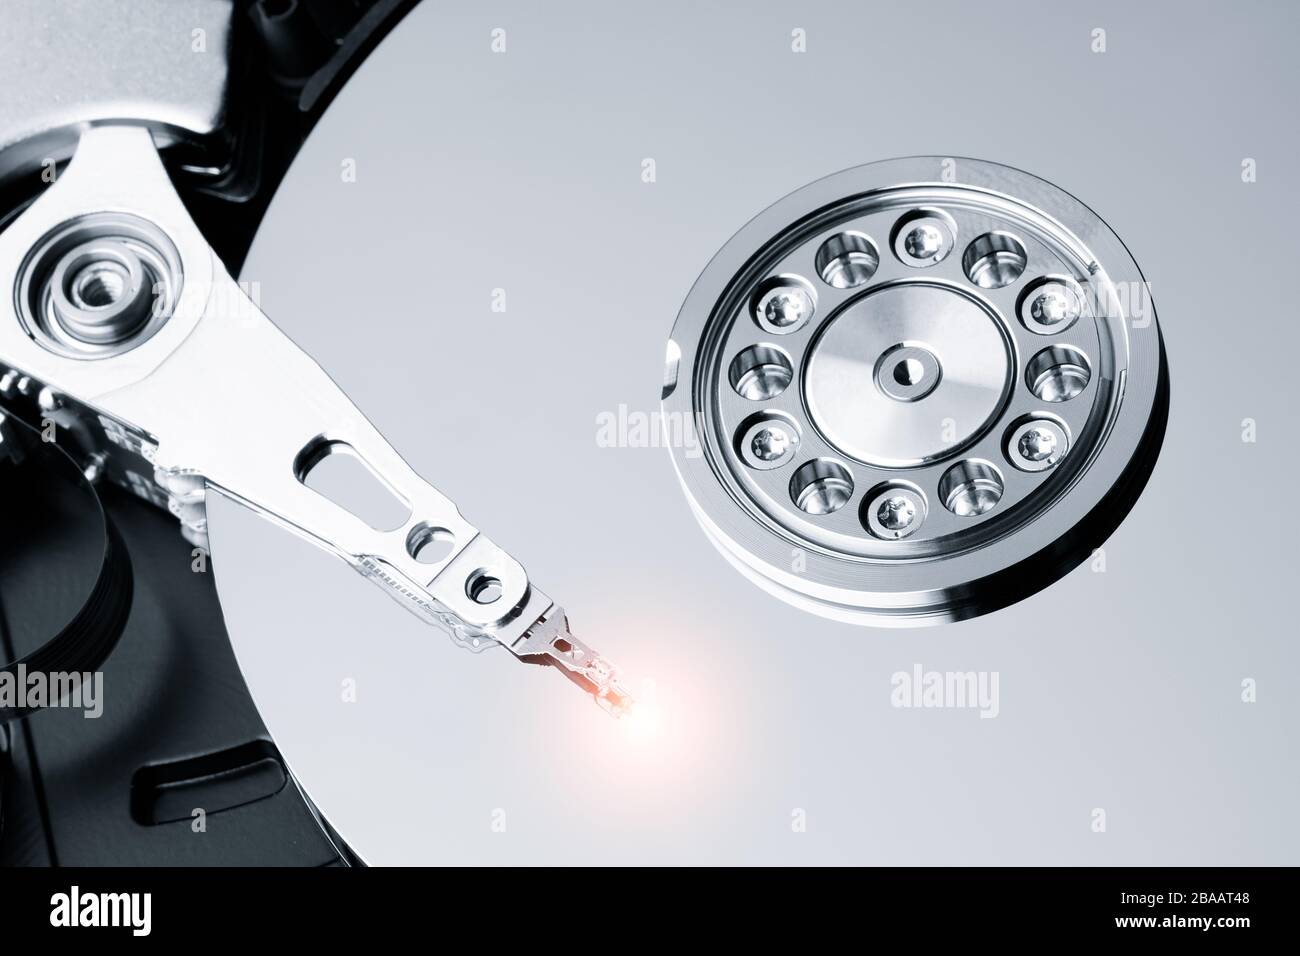 Data recovery concept. Сomputer repair and service concept. Stock Photo